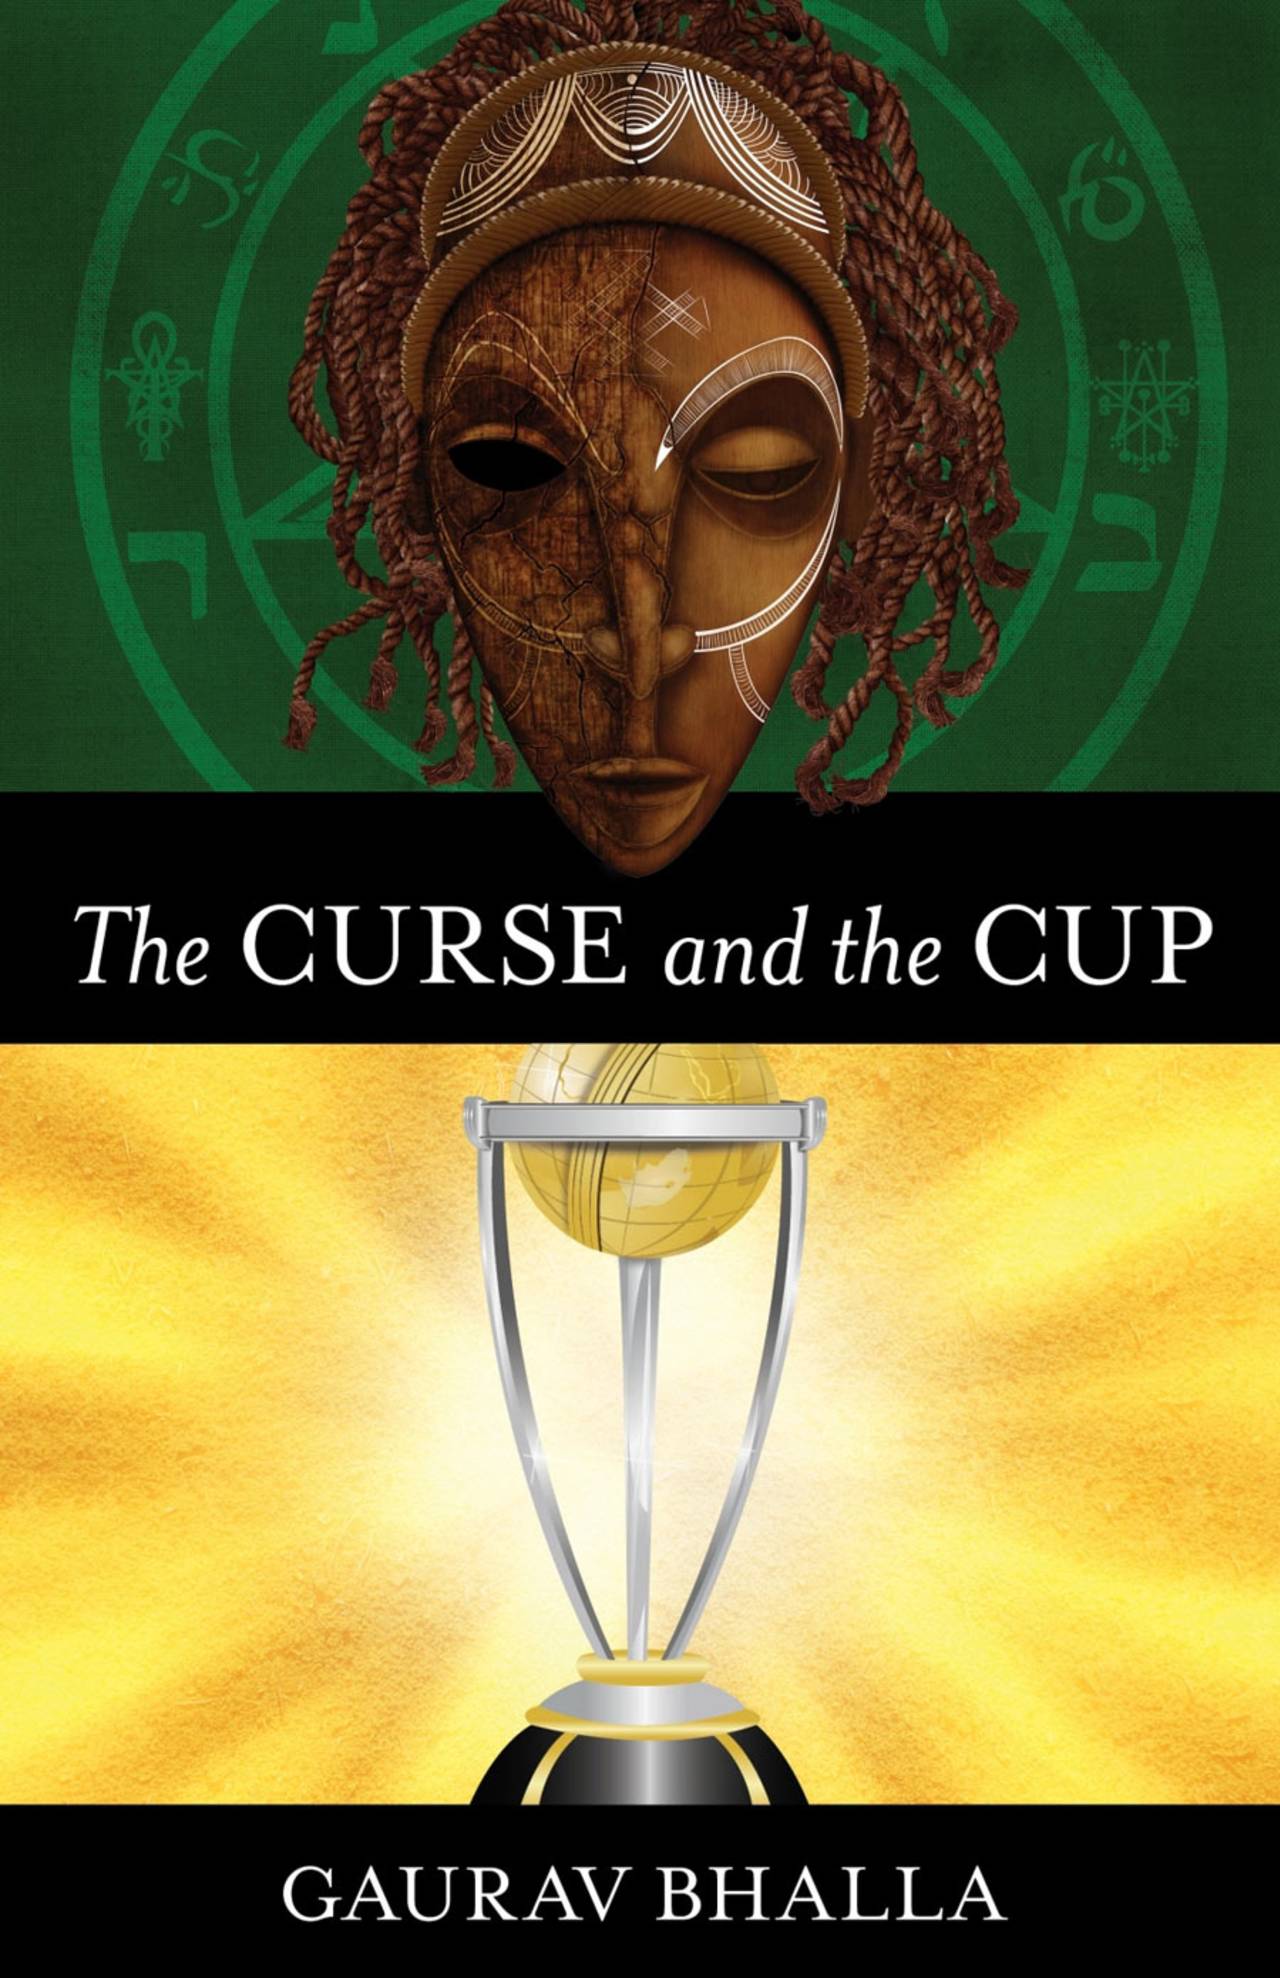 Cover image of Gaurav Bhalla's <i>The Curse and the Cup</i>